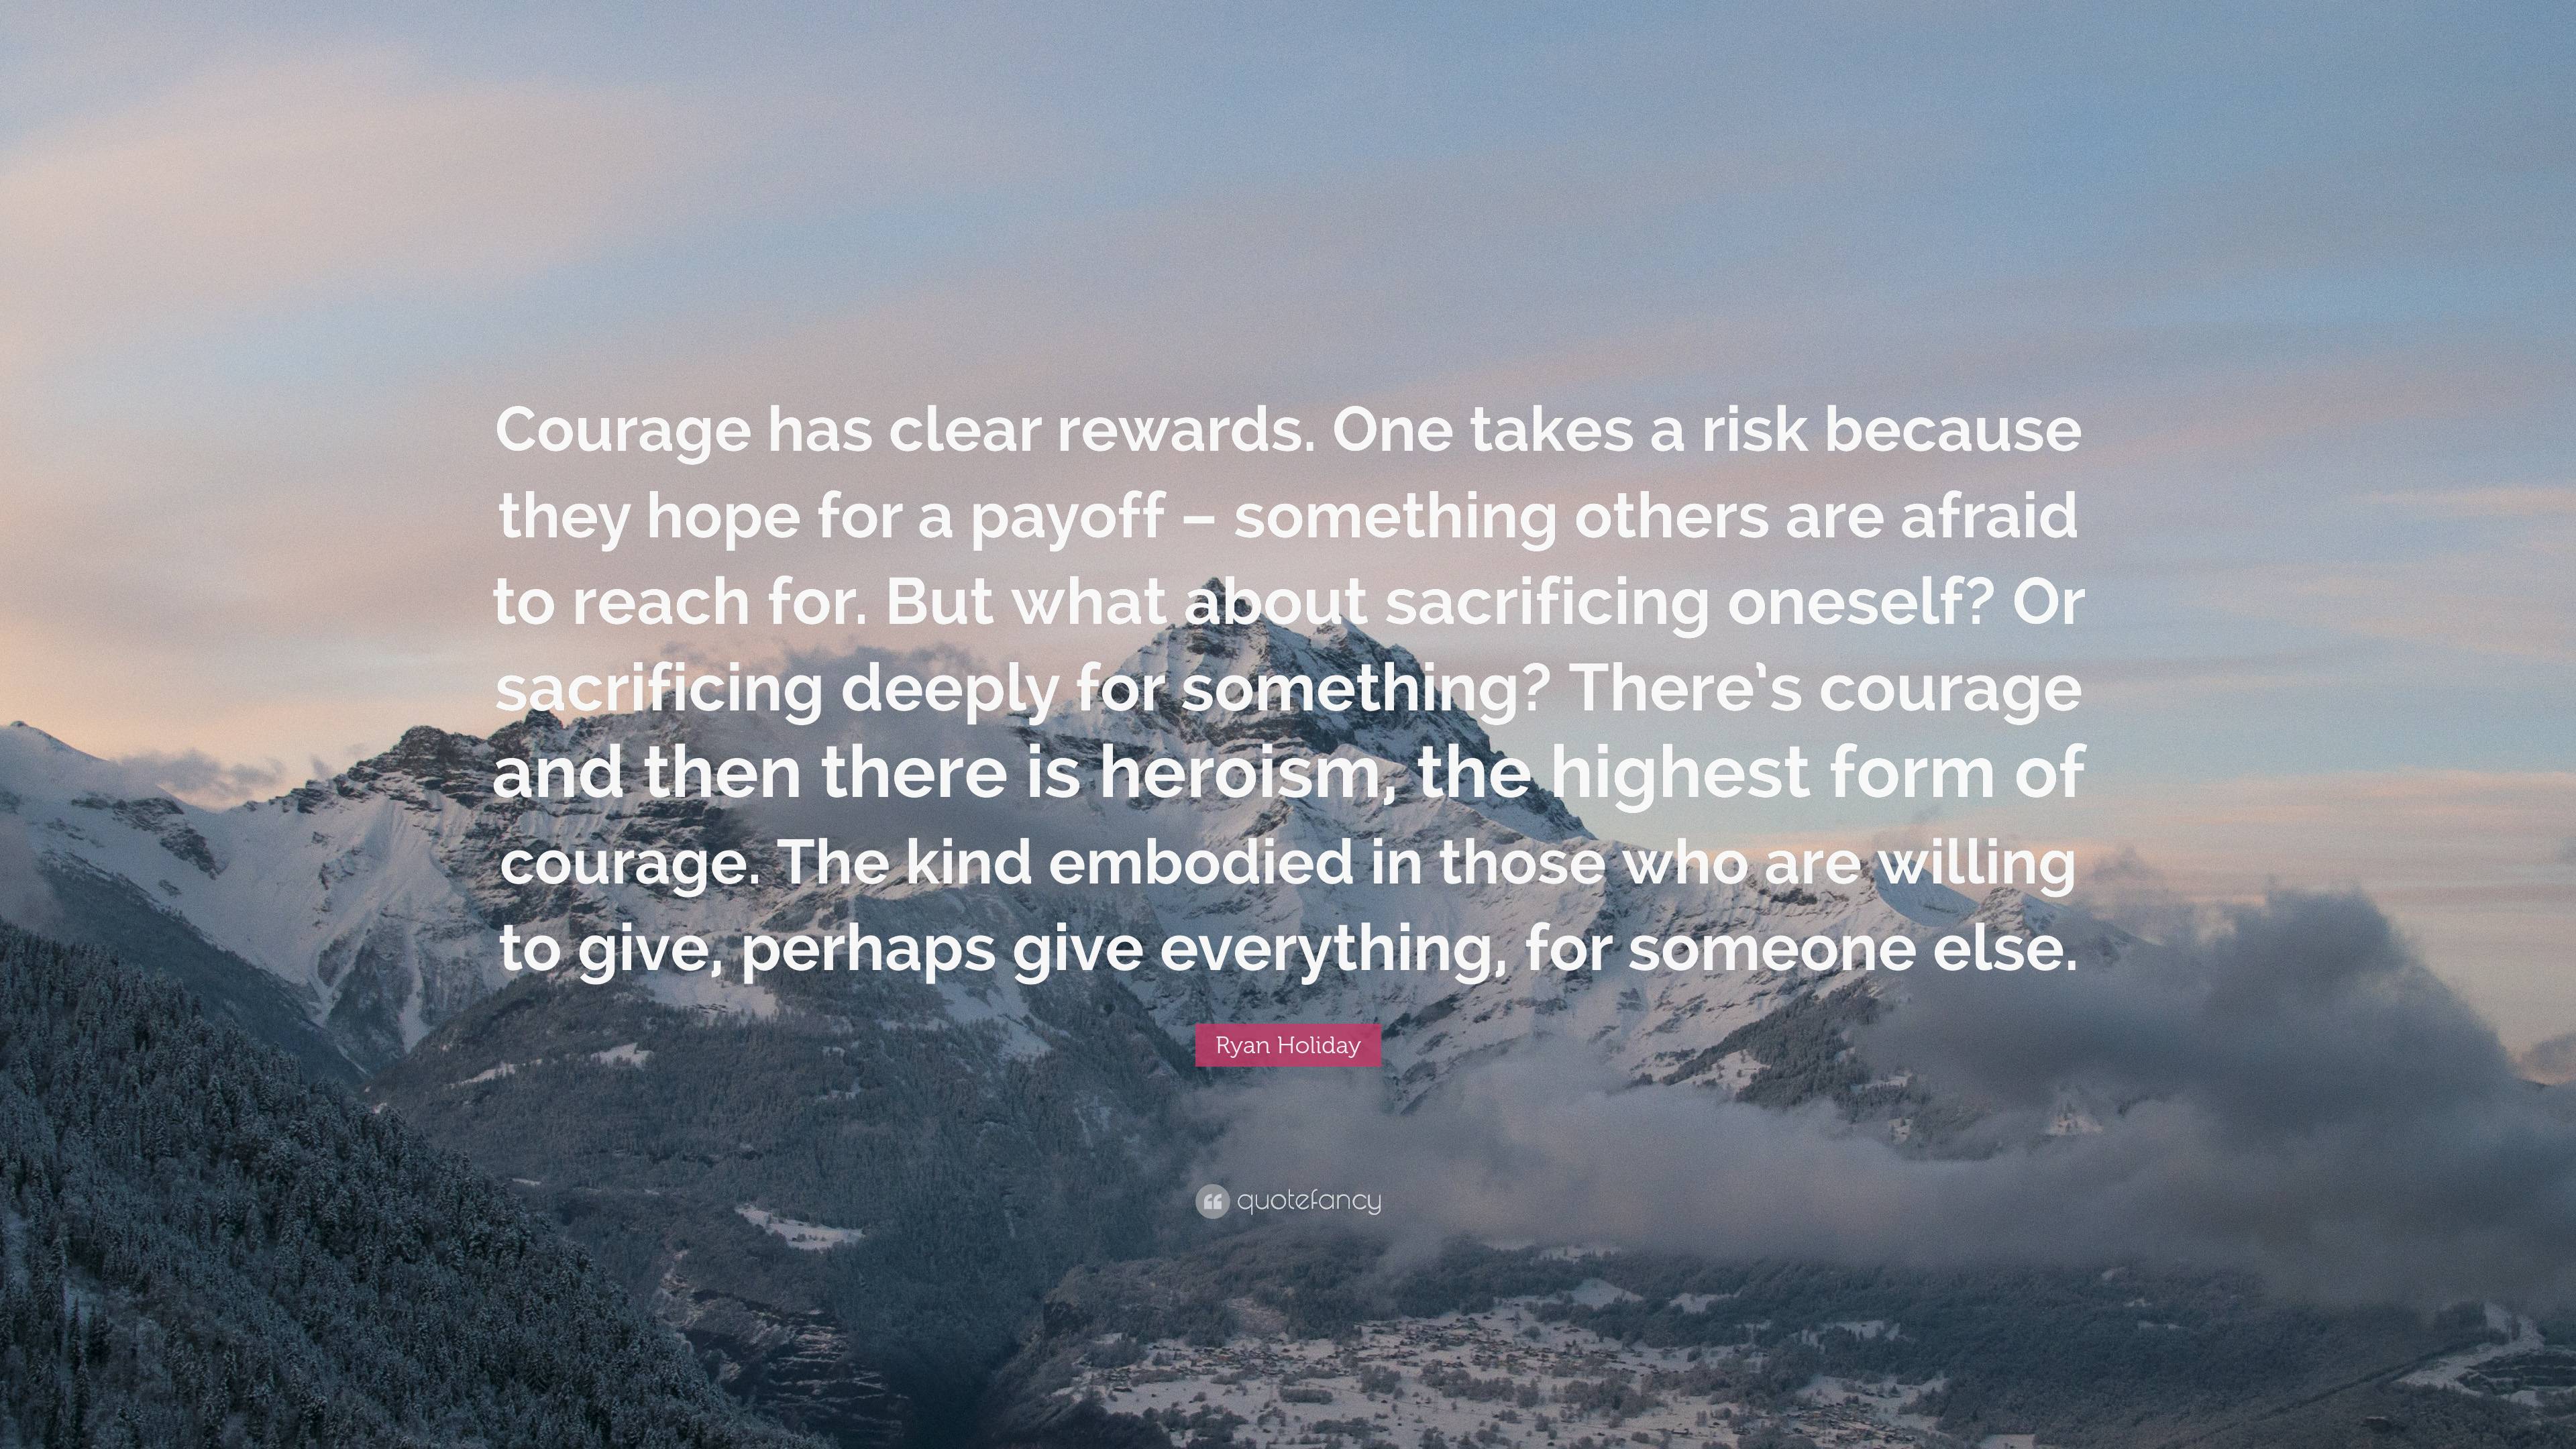 Ryan Holiday Quote: “Courage has clear rewards. One takes a risk because  they hope for a payoff – something others are afraid to reach for. B”